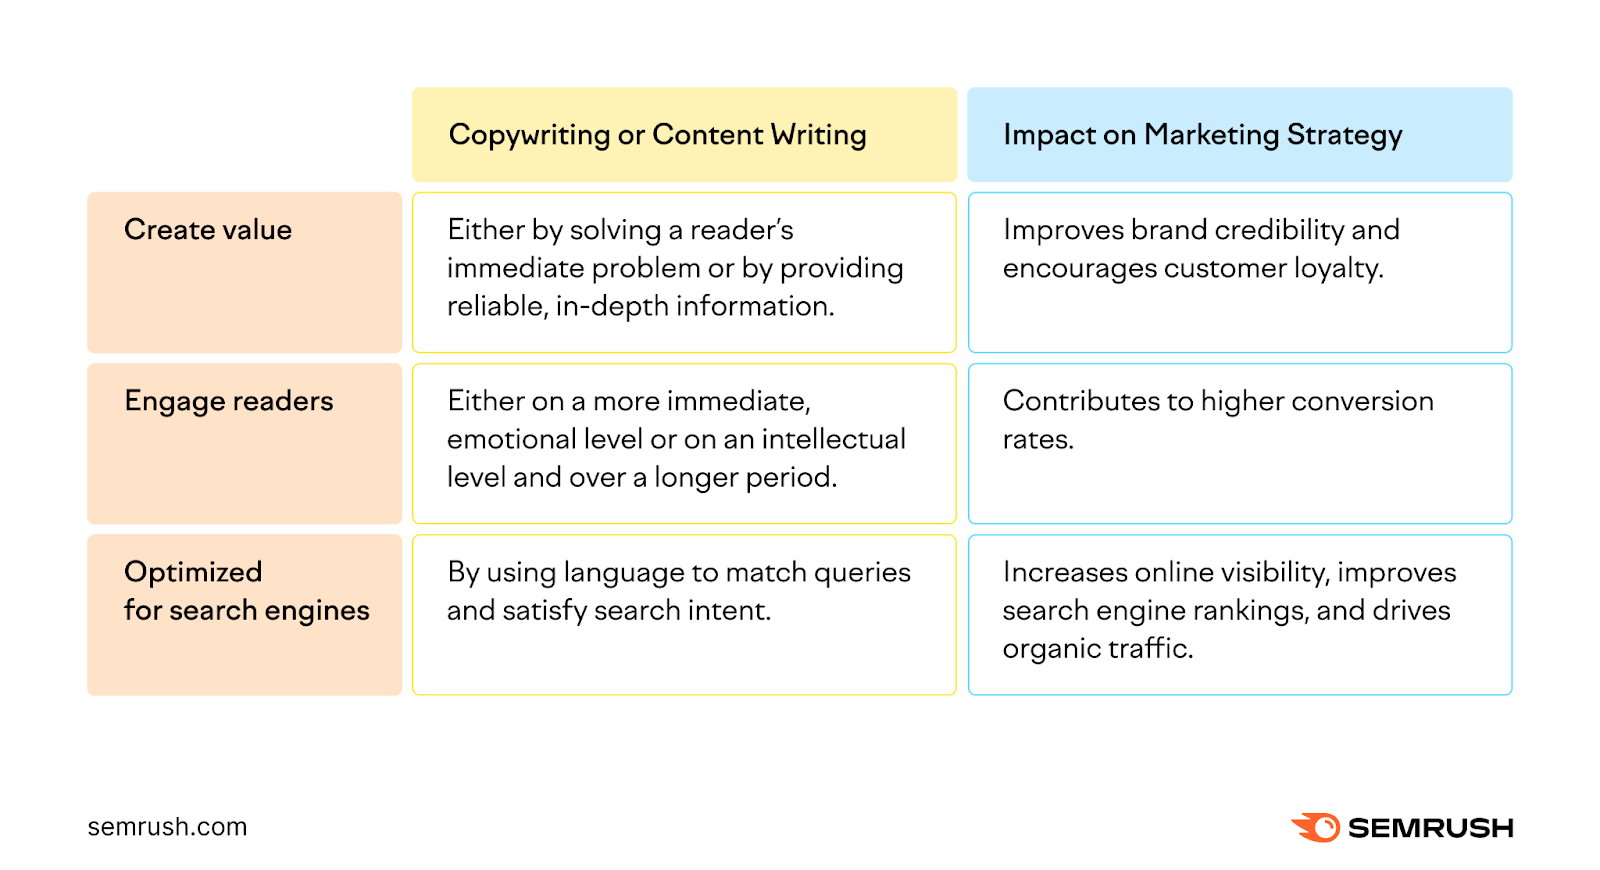 A table listing the key similarities between copywriting and content writing, being "create value," "engage readers," and "optimized for search engines"